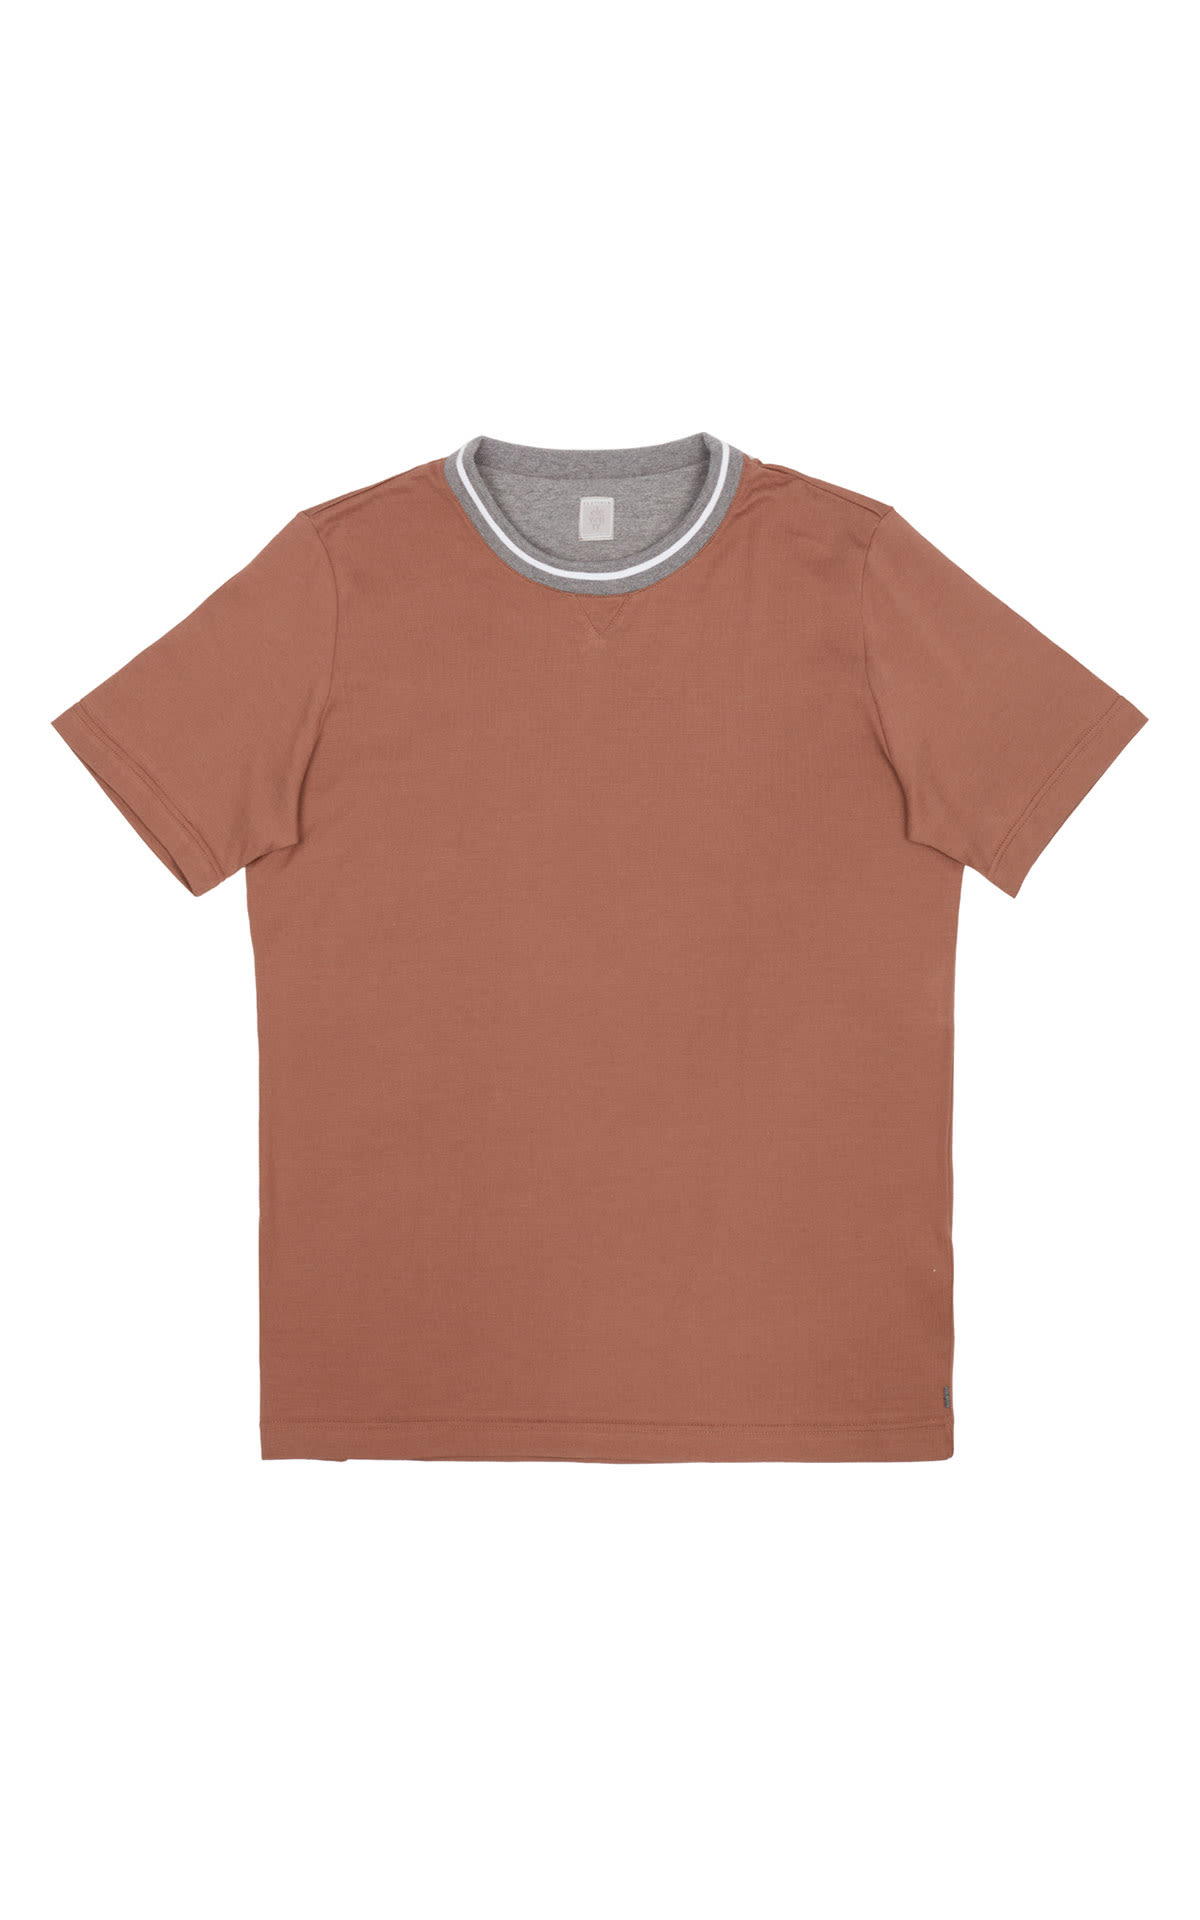 Eleventy 100% Eqyptian cotton tee mens from Bicester Village